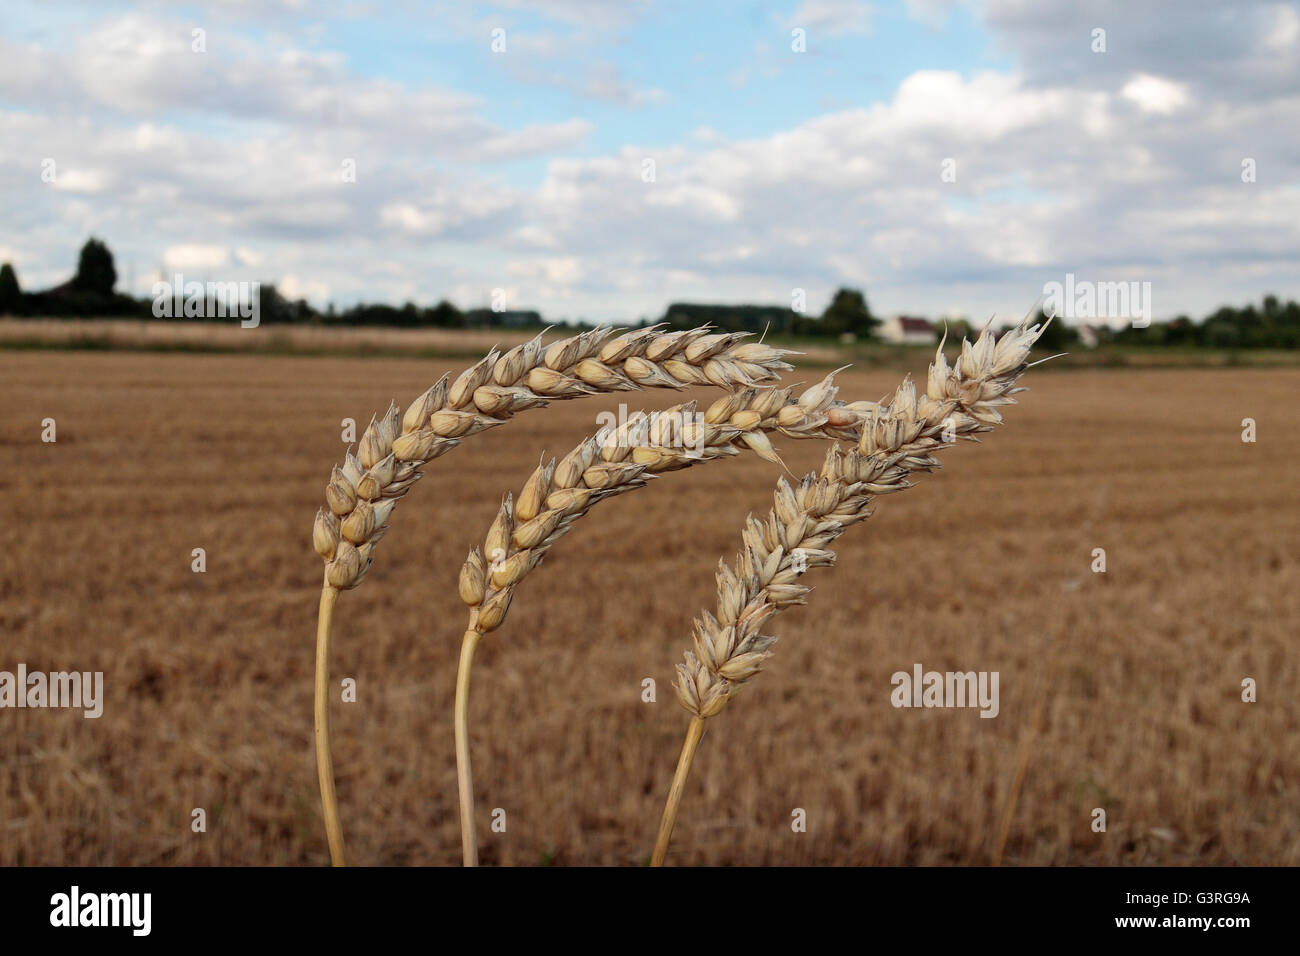 Three stalks of common wheat (bread wheat/Triticum aestivum) with an out of focus harvested field behind, Northern France. Stock Photo